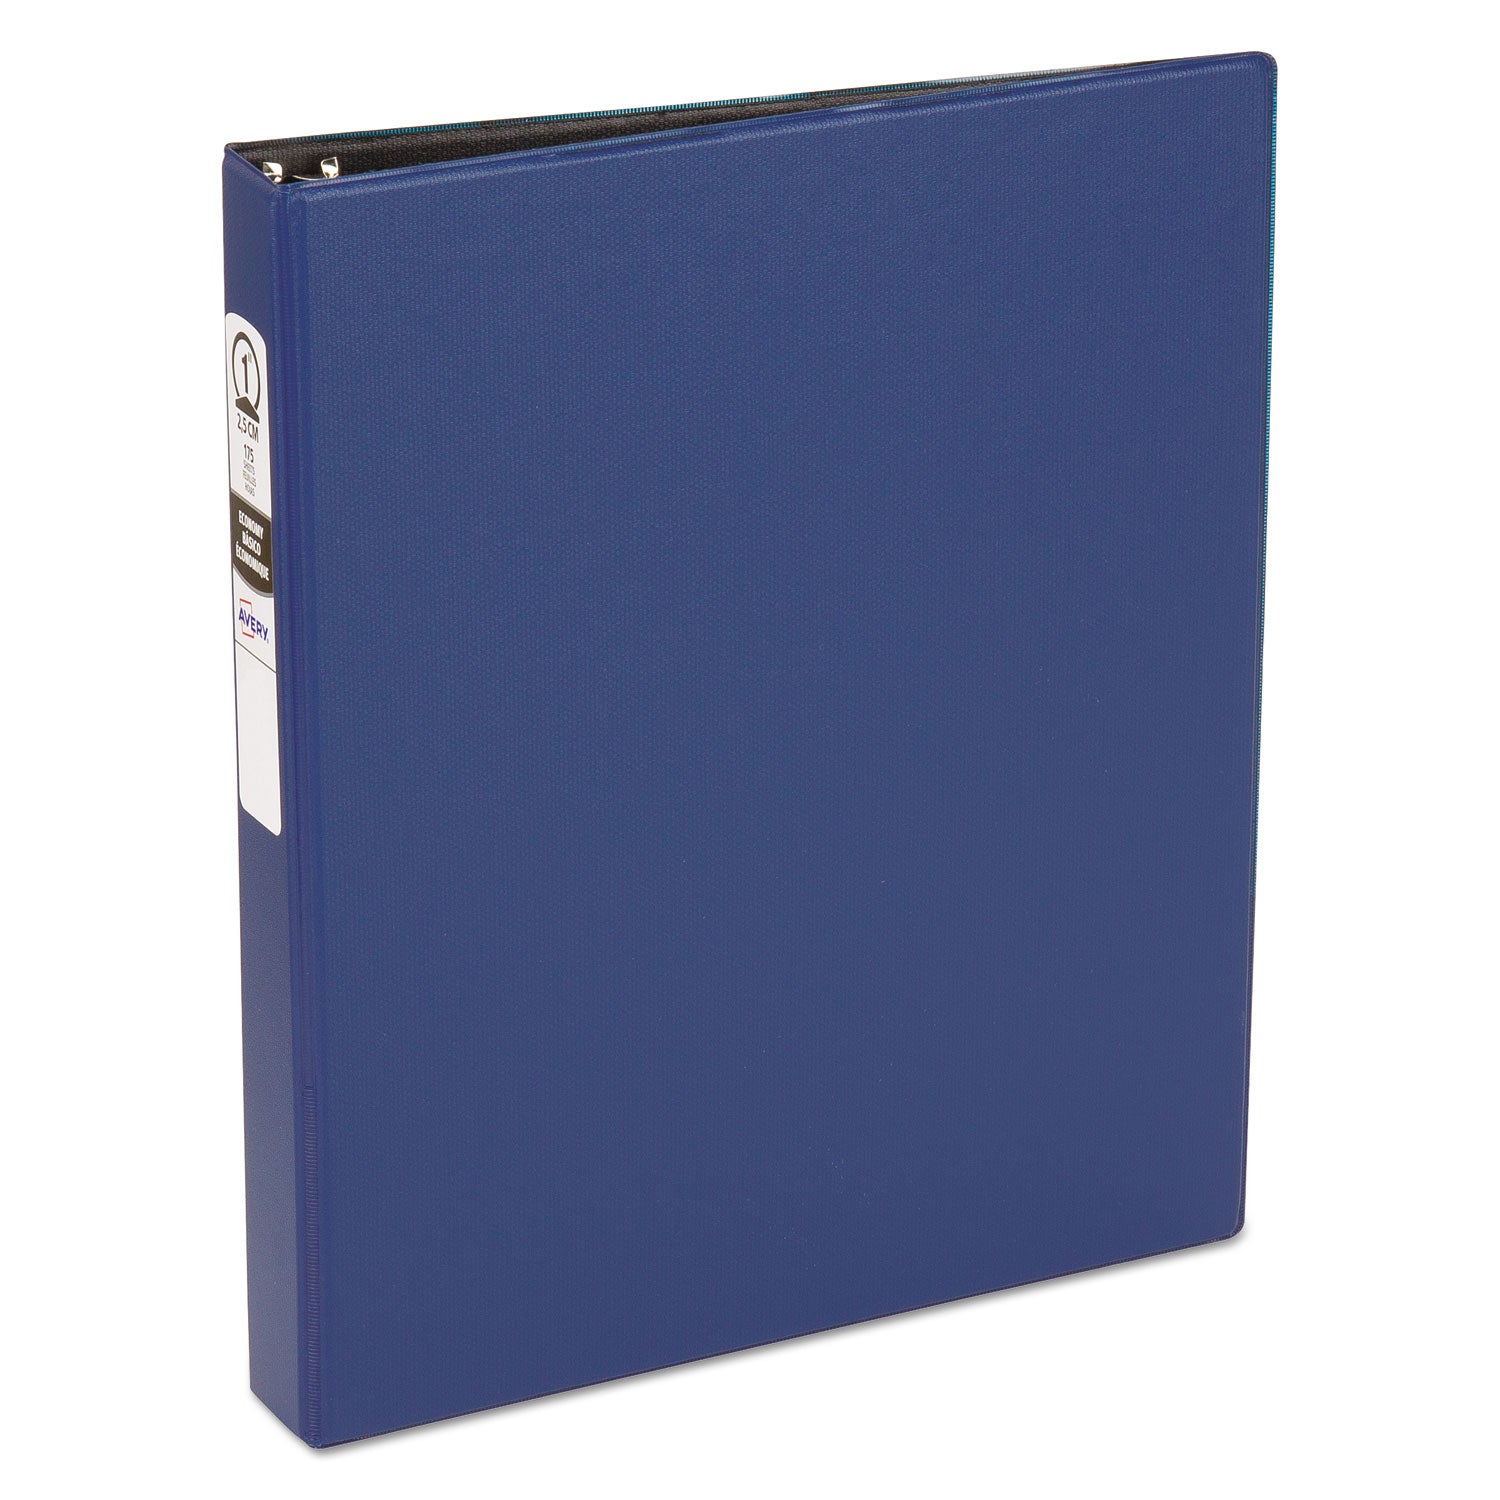 Economy Non-View Binder with Round Rings, 3 Rings, 1" Capacity, 11 x 8.5, Blue, (3300) - 